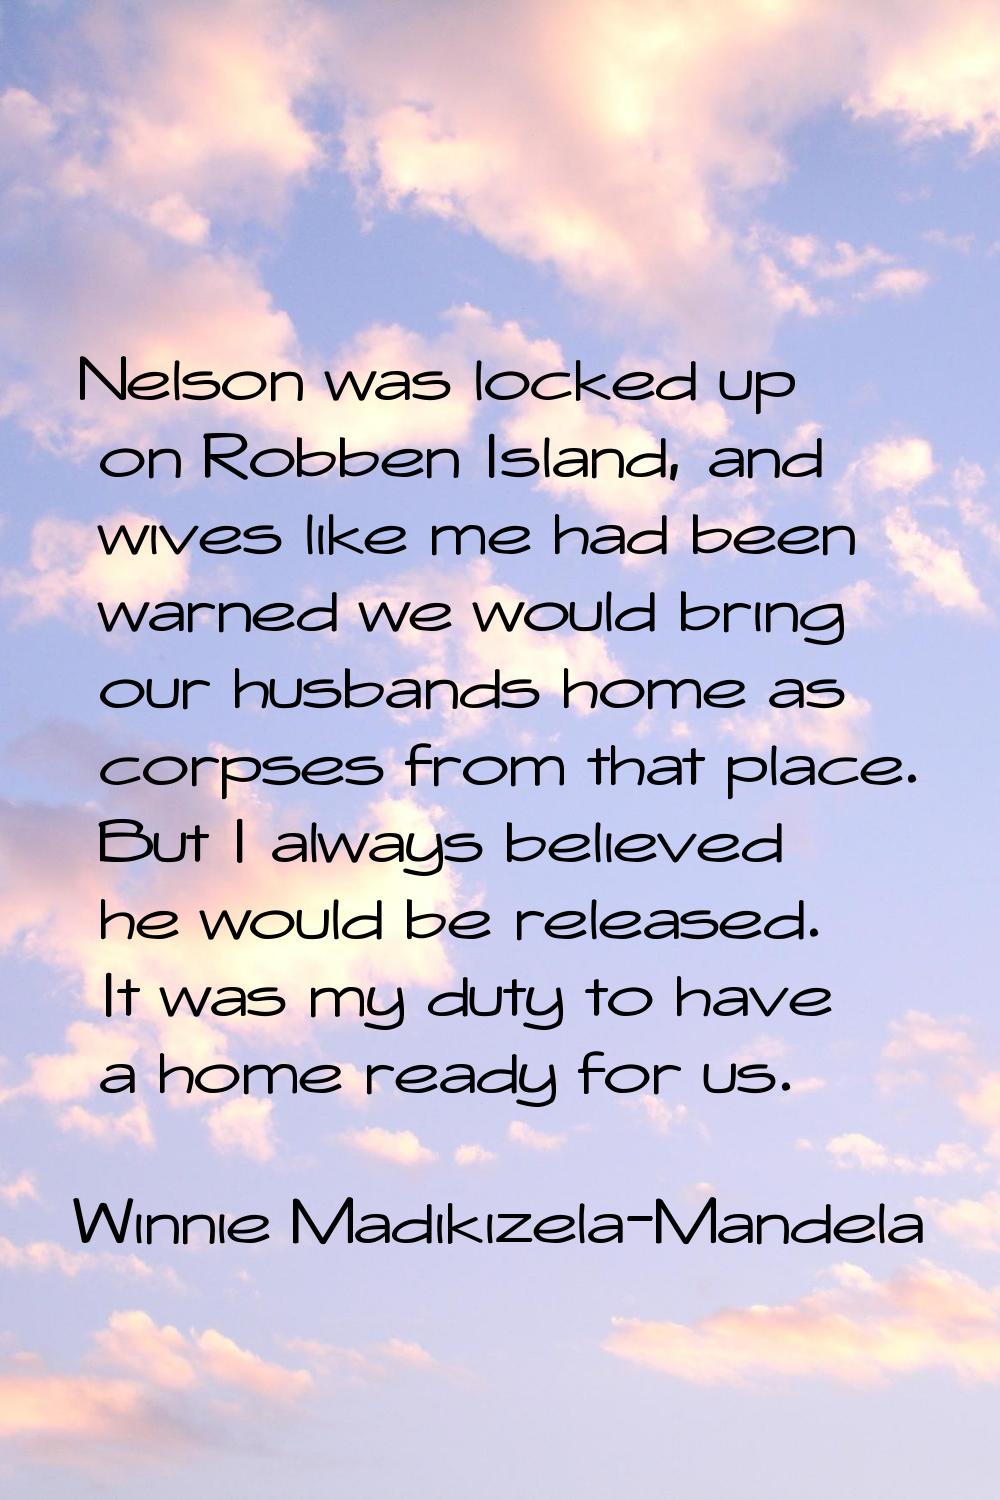 Nelson was locked up on Robben Island, and wives like me had been warned we would bring our husband